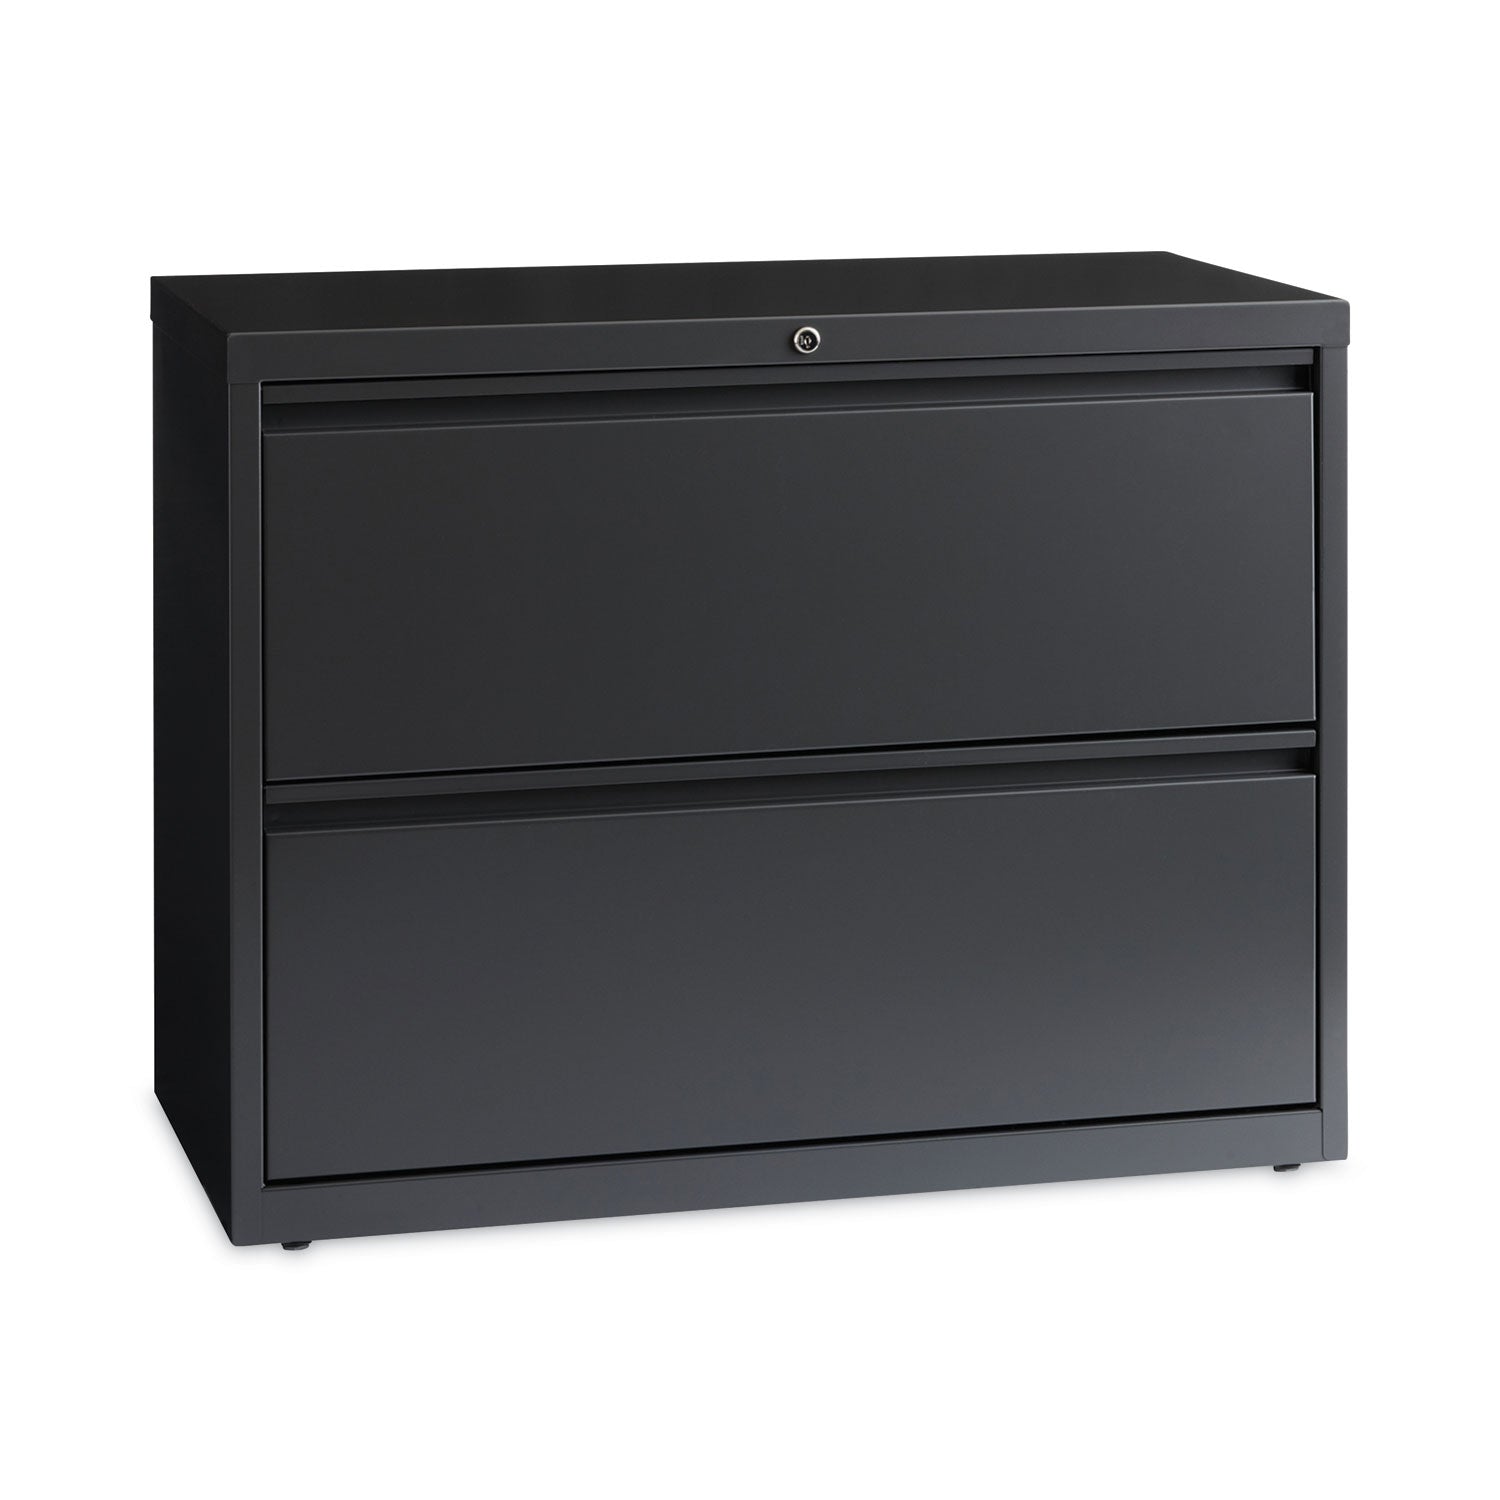 lateral-file-cabinet-2-letter-legal-a4-size-file-drawers-charcoal-36-x-1862-x-28_hid16065 - 1